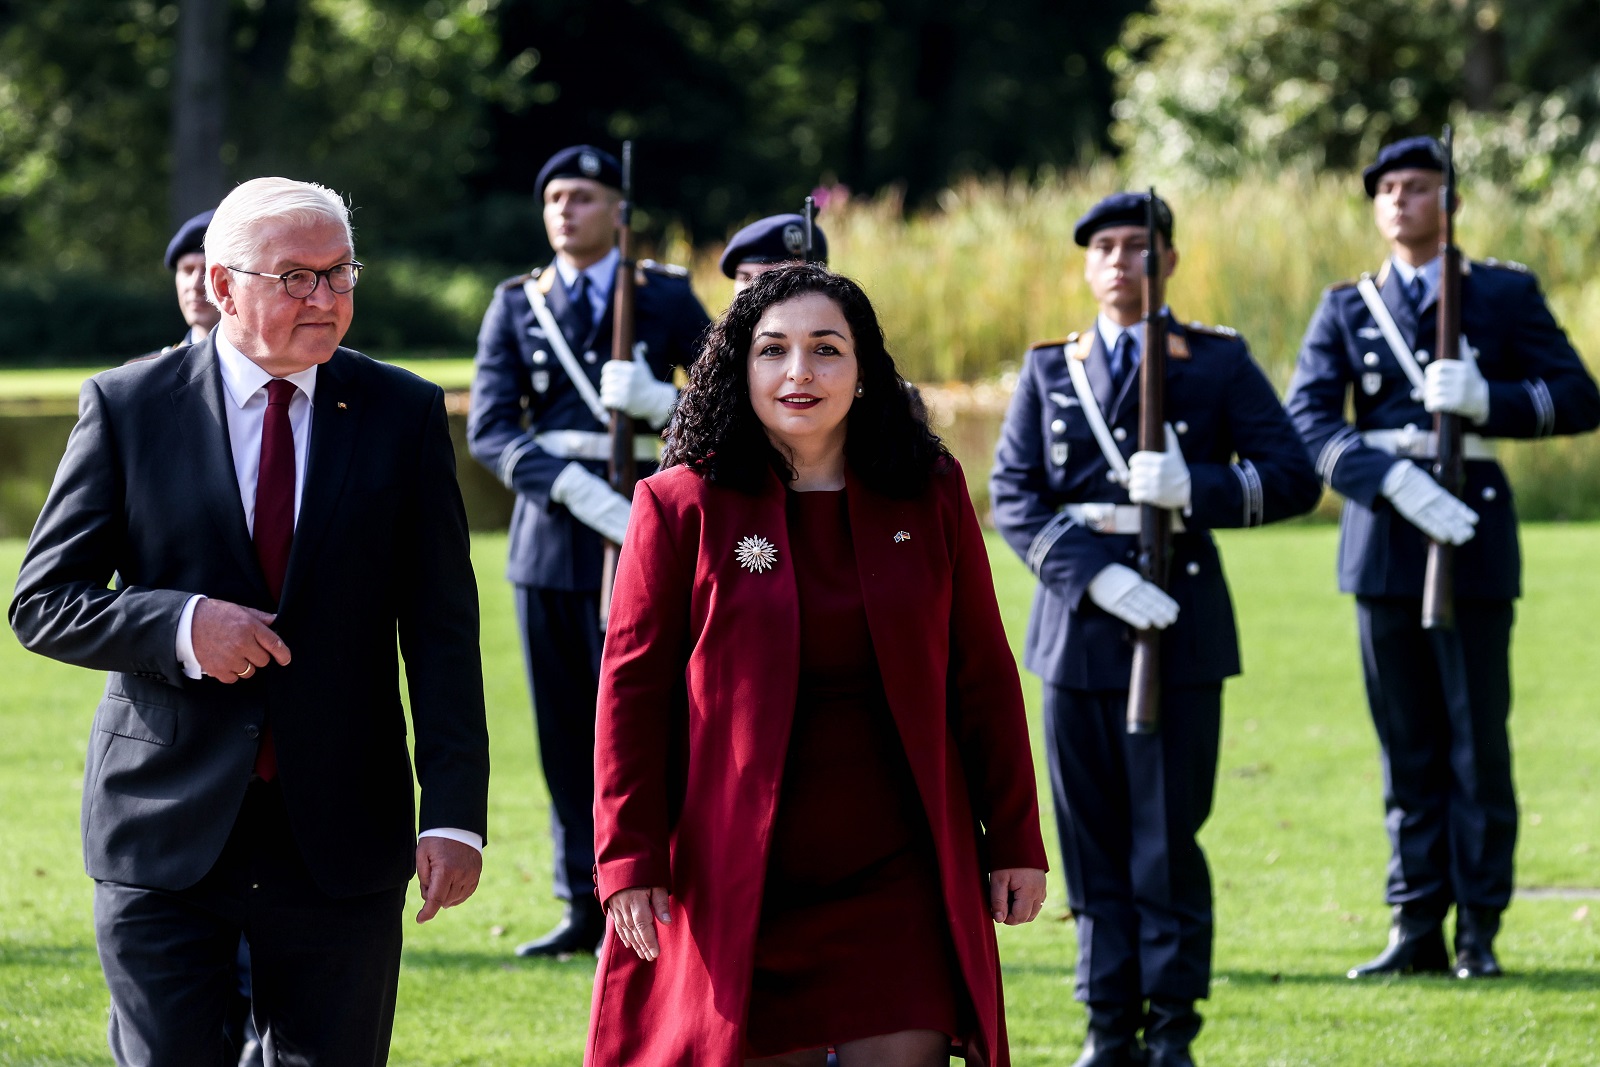 epa09467574 German President Frank-Walter Steinmeier (L) welcomes Vjosa Osmani, President of the Republic of Kosovo with military honors at Bellevue Palace in Berlin, Germany, 14 September 2021.  EPA/FILIP SINGER